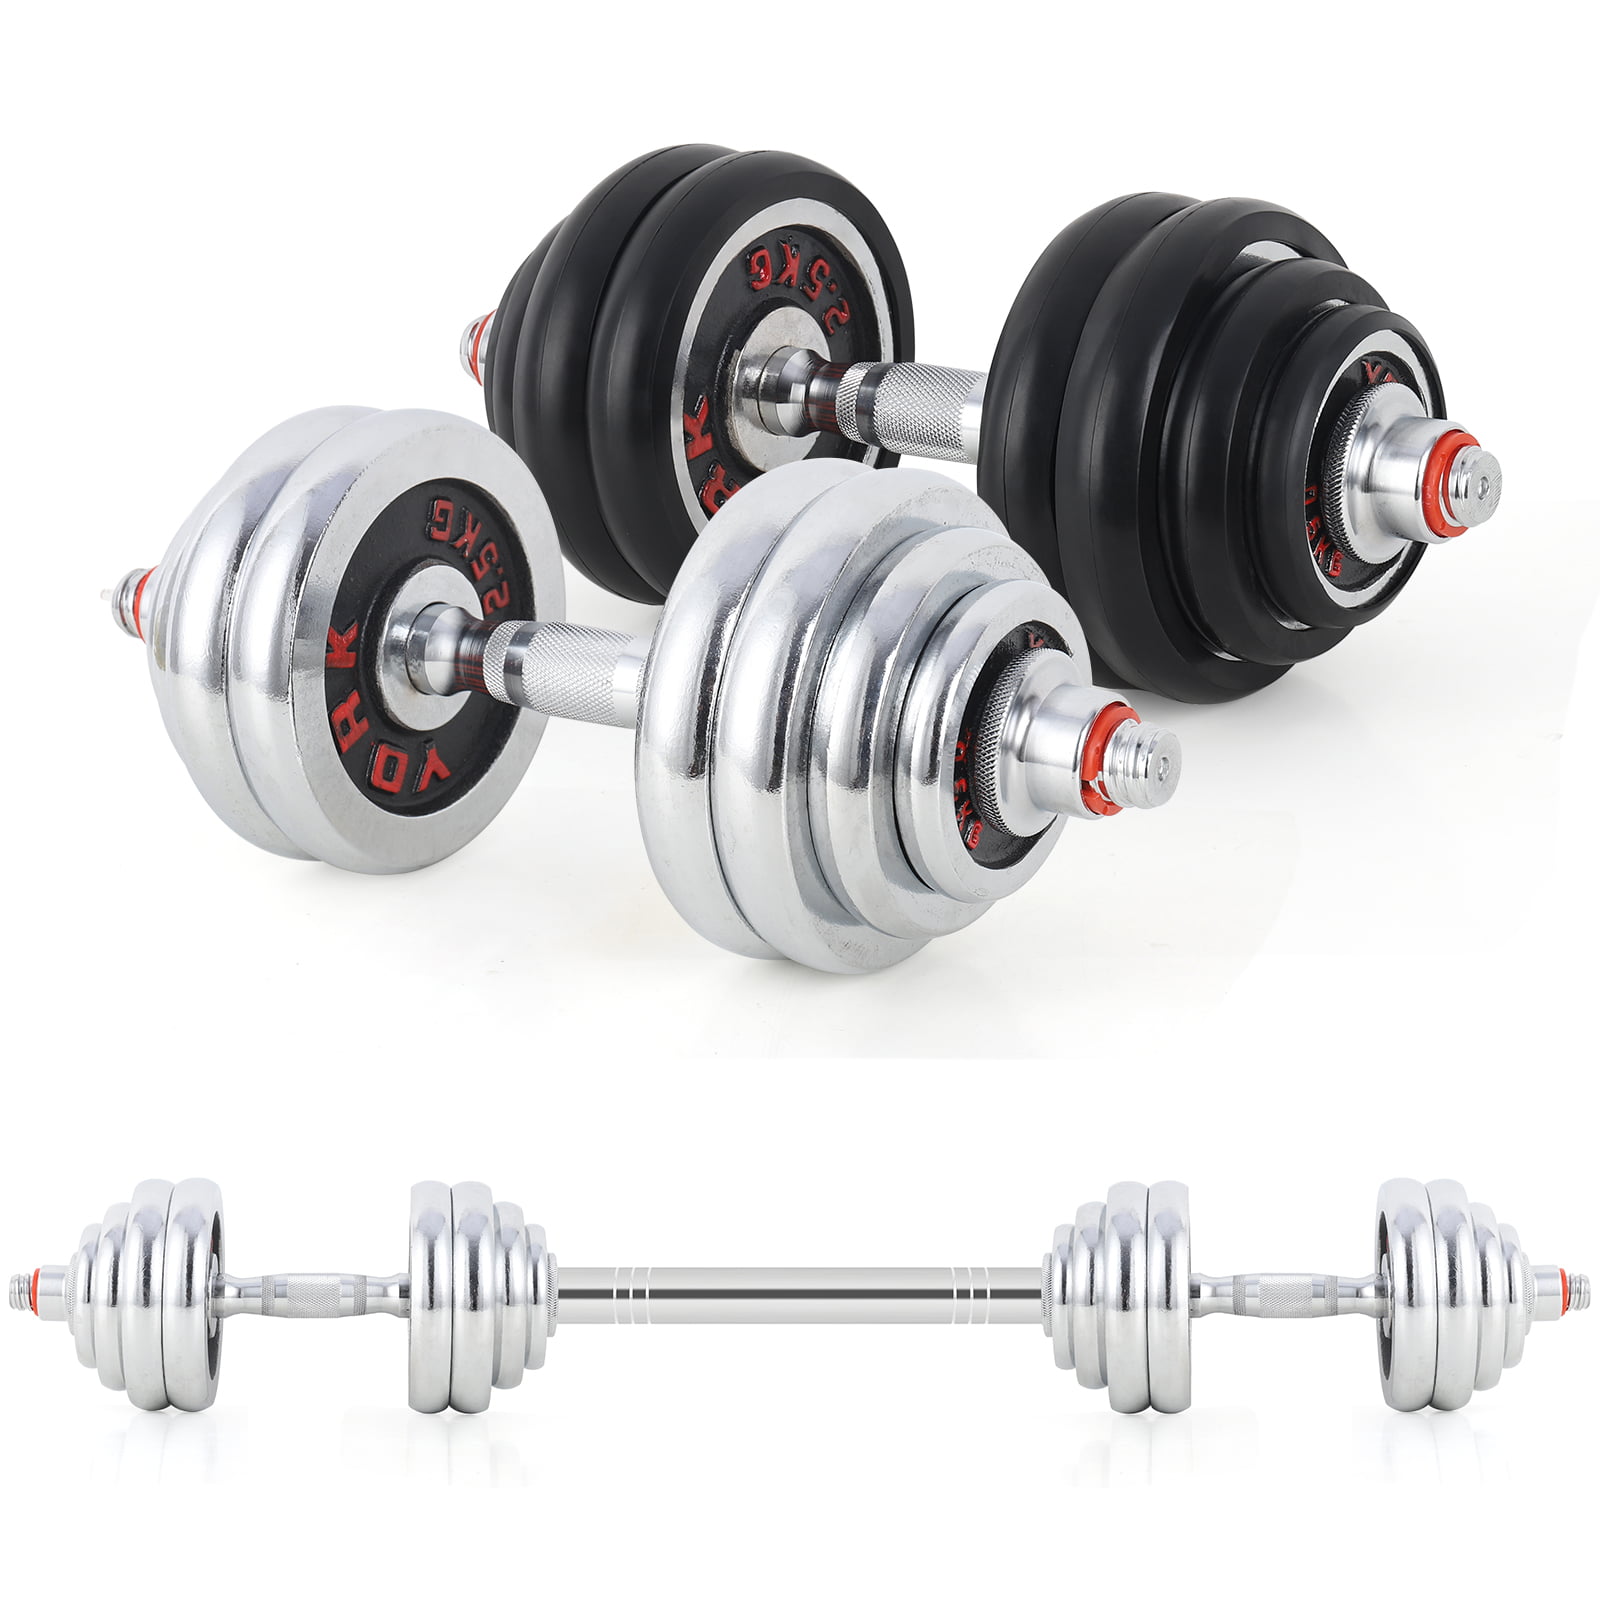 44 LBS 20KG Adjustable Dumbbell Weight Chrome Steel Set with Barbell Option 